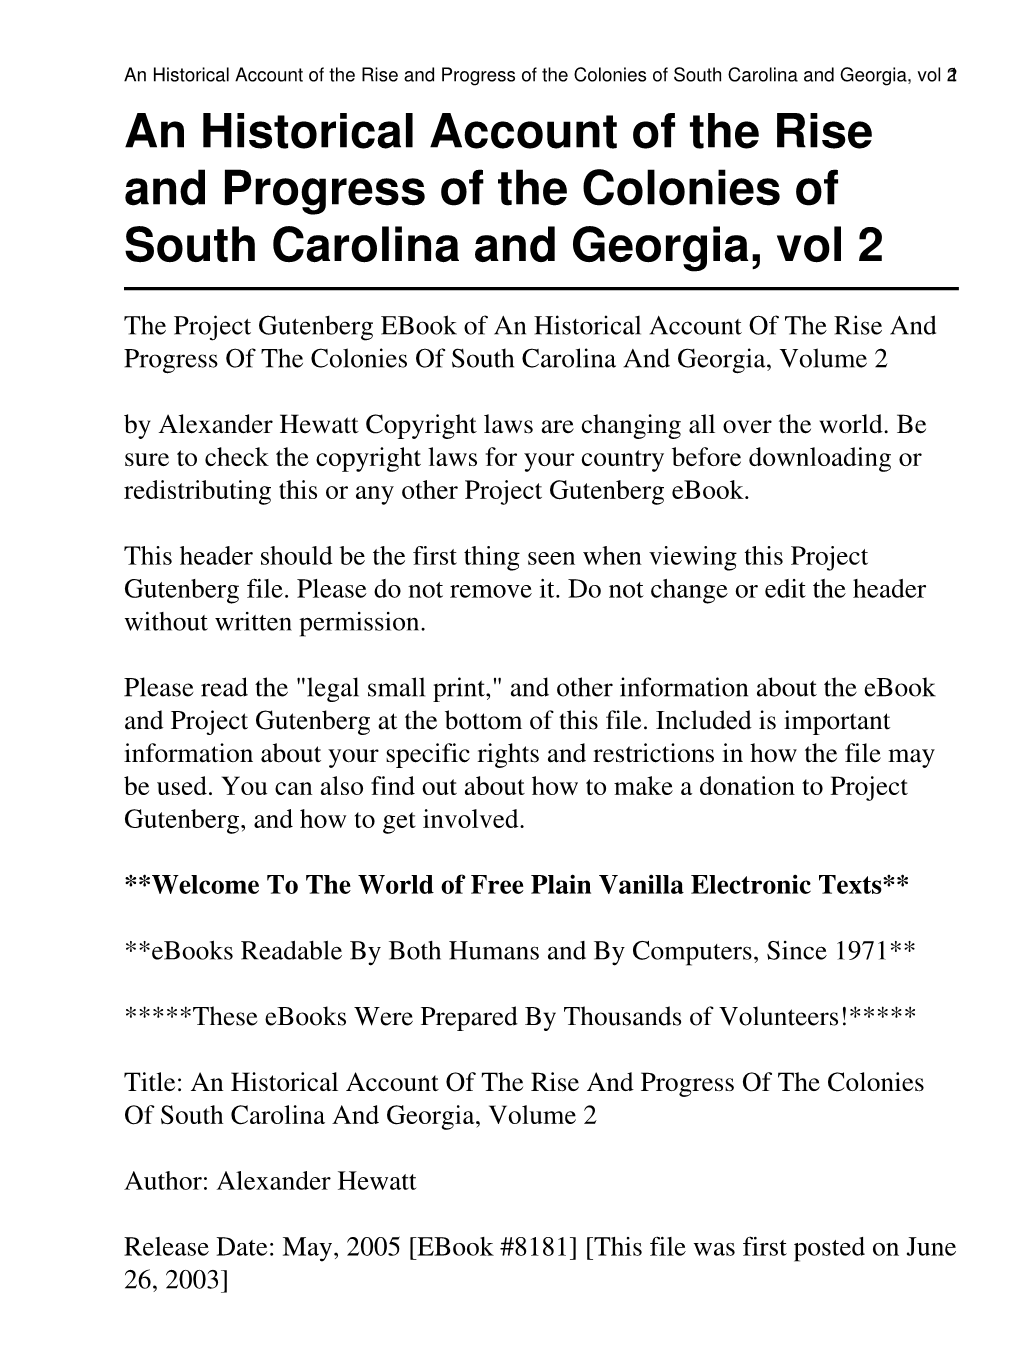 An Historical Account of the Rise and Progress of the Colonies of South